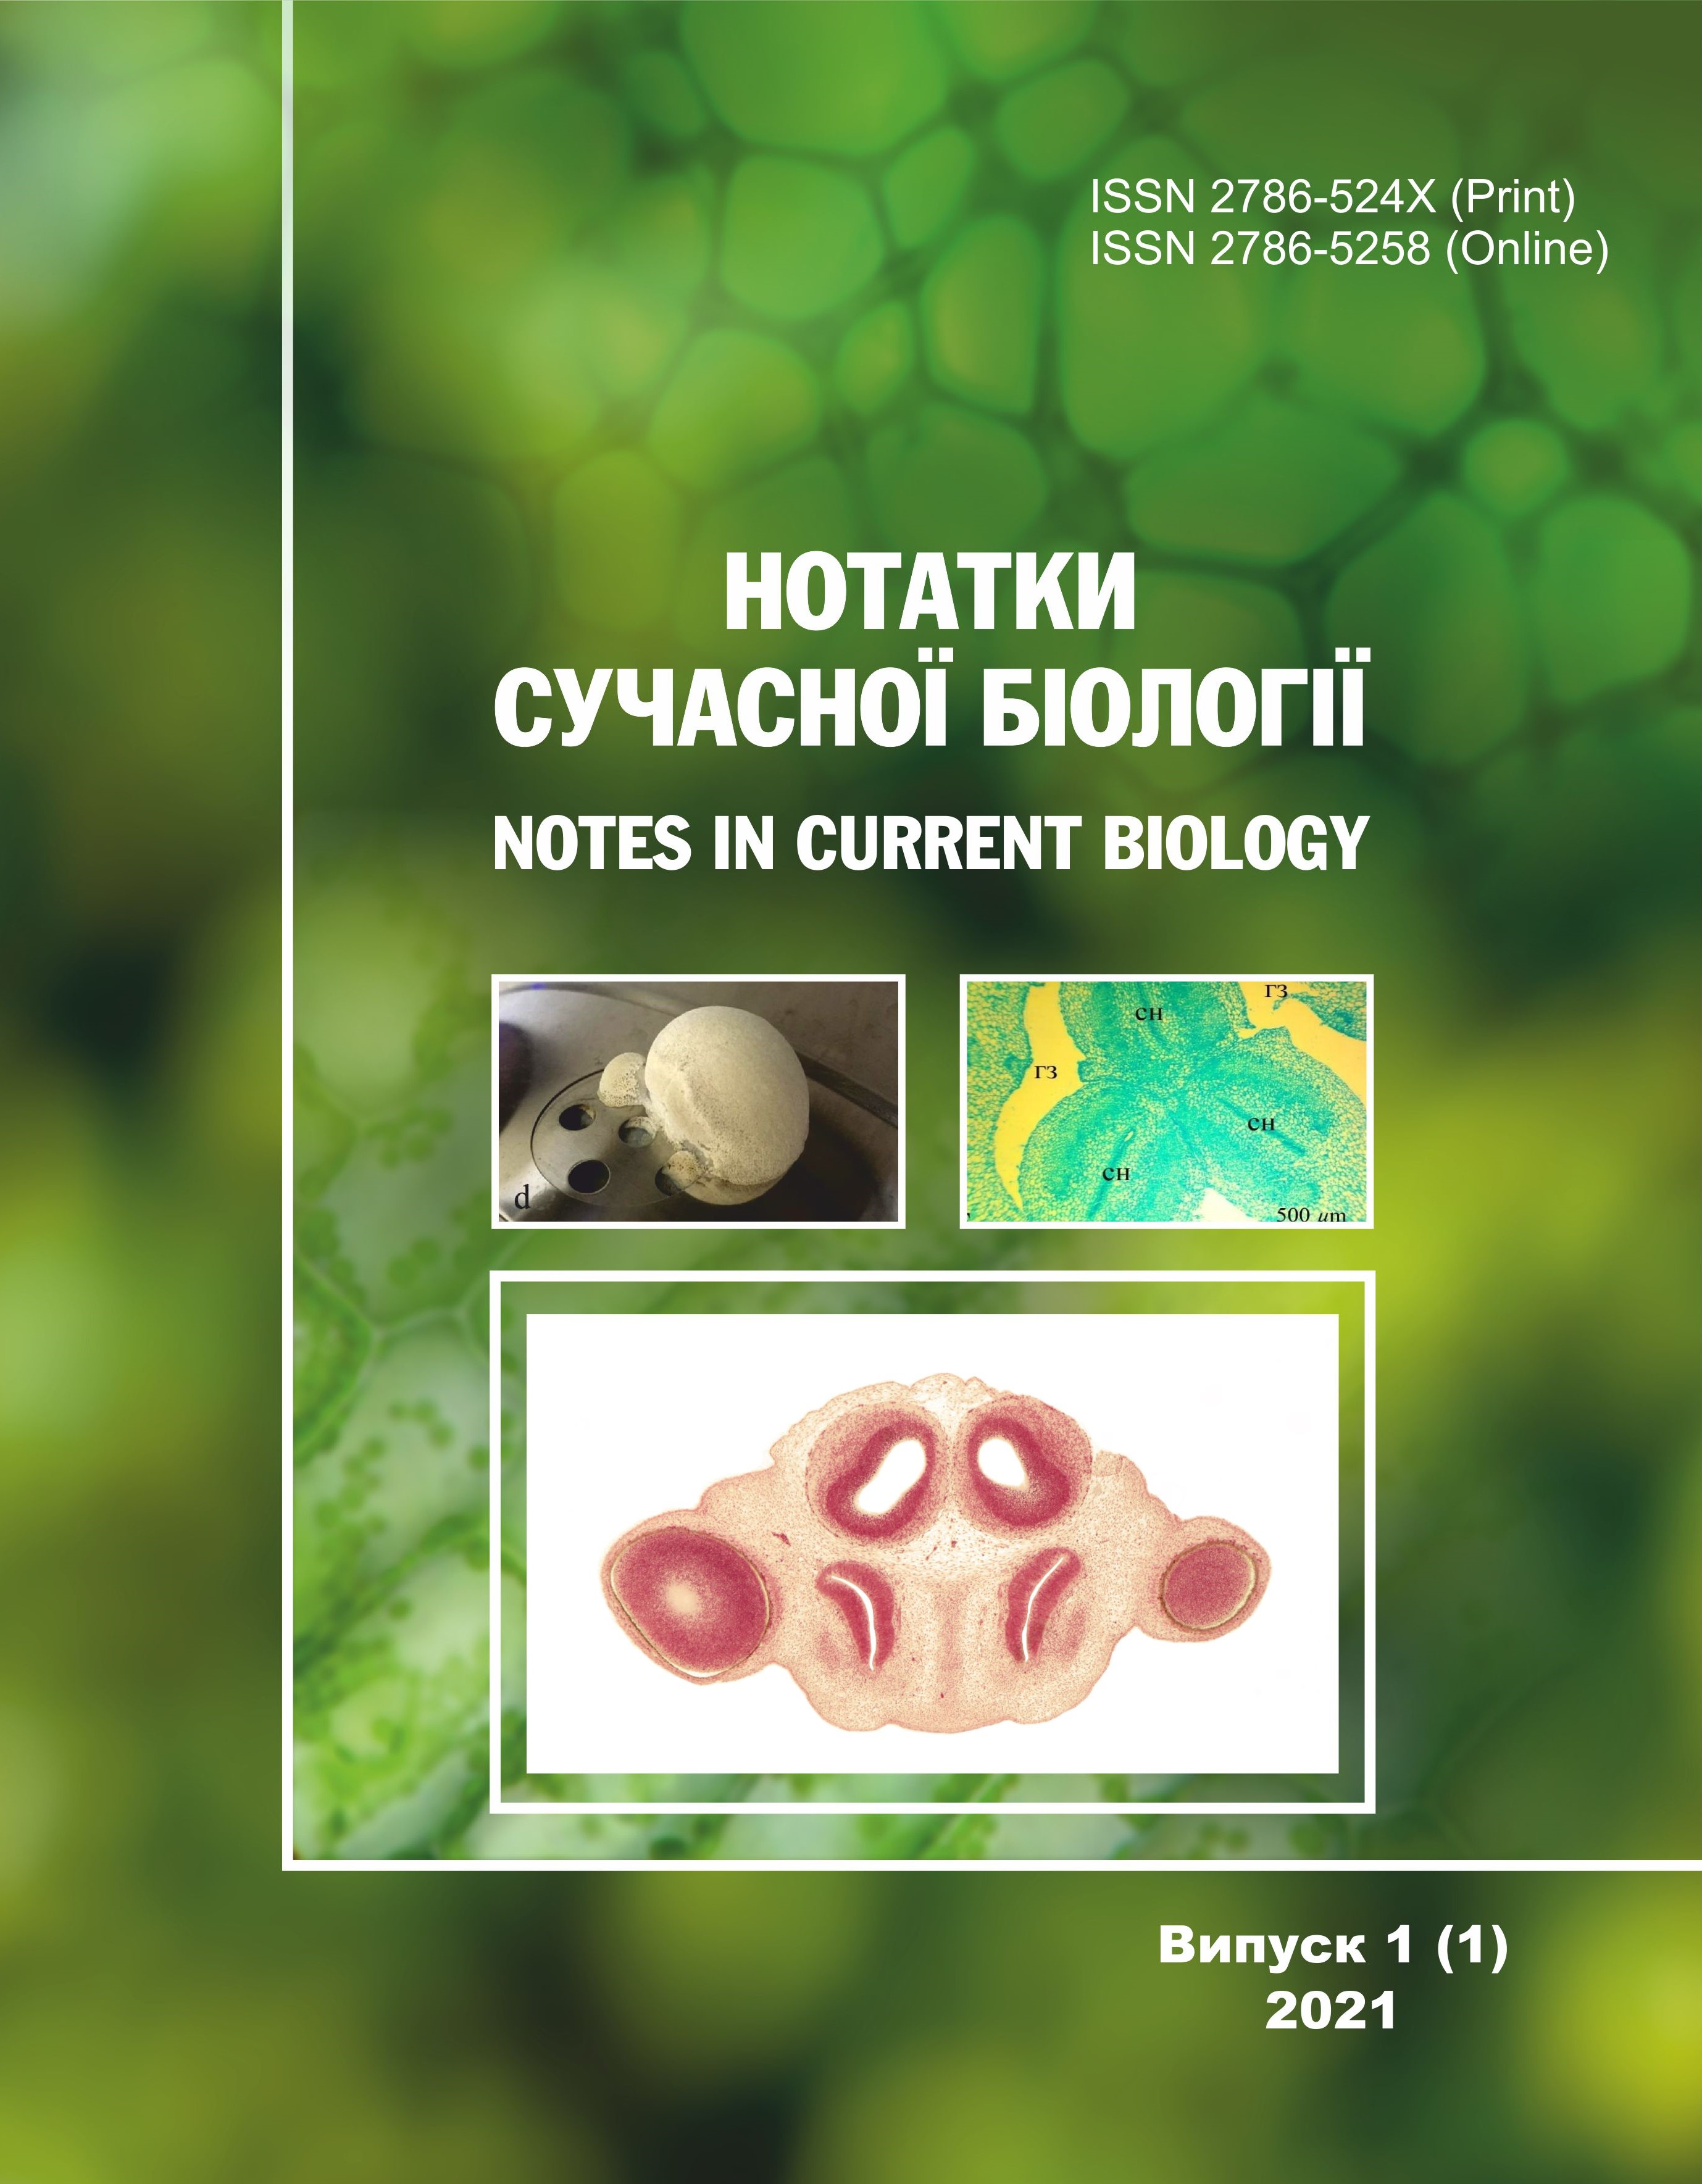 					View No. 1 (1) (2021): Notes in Current Biology
				